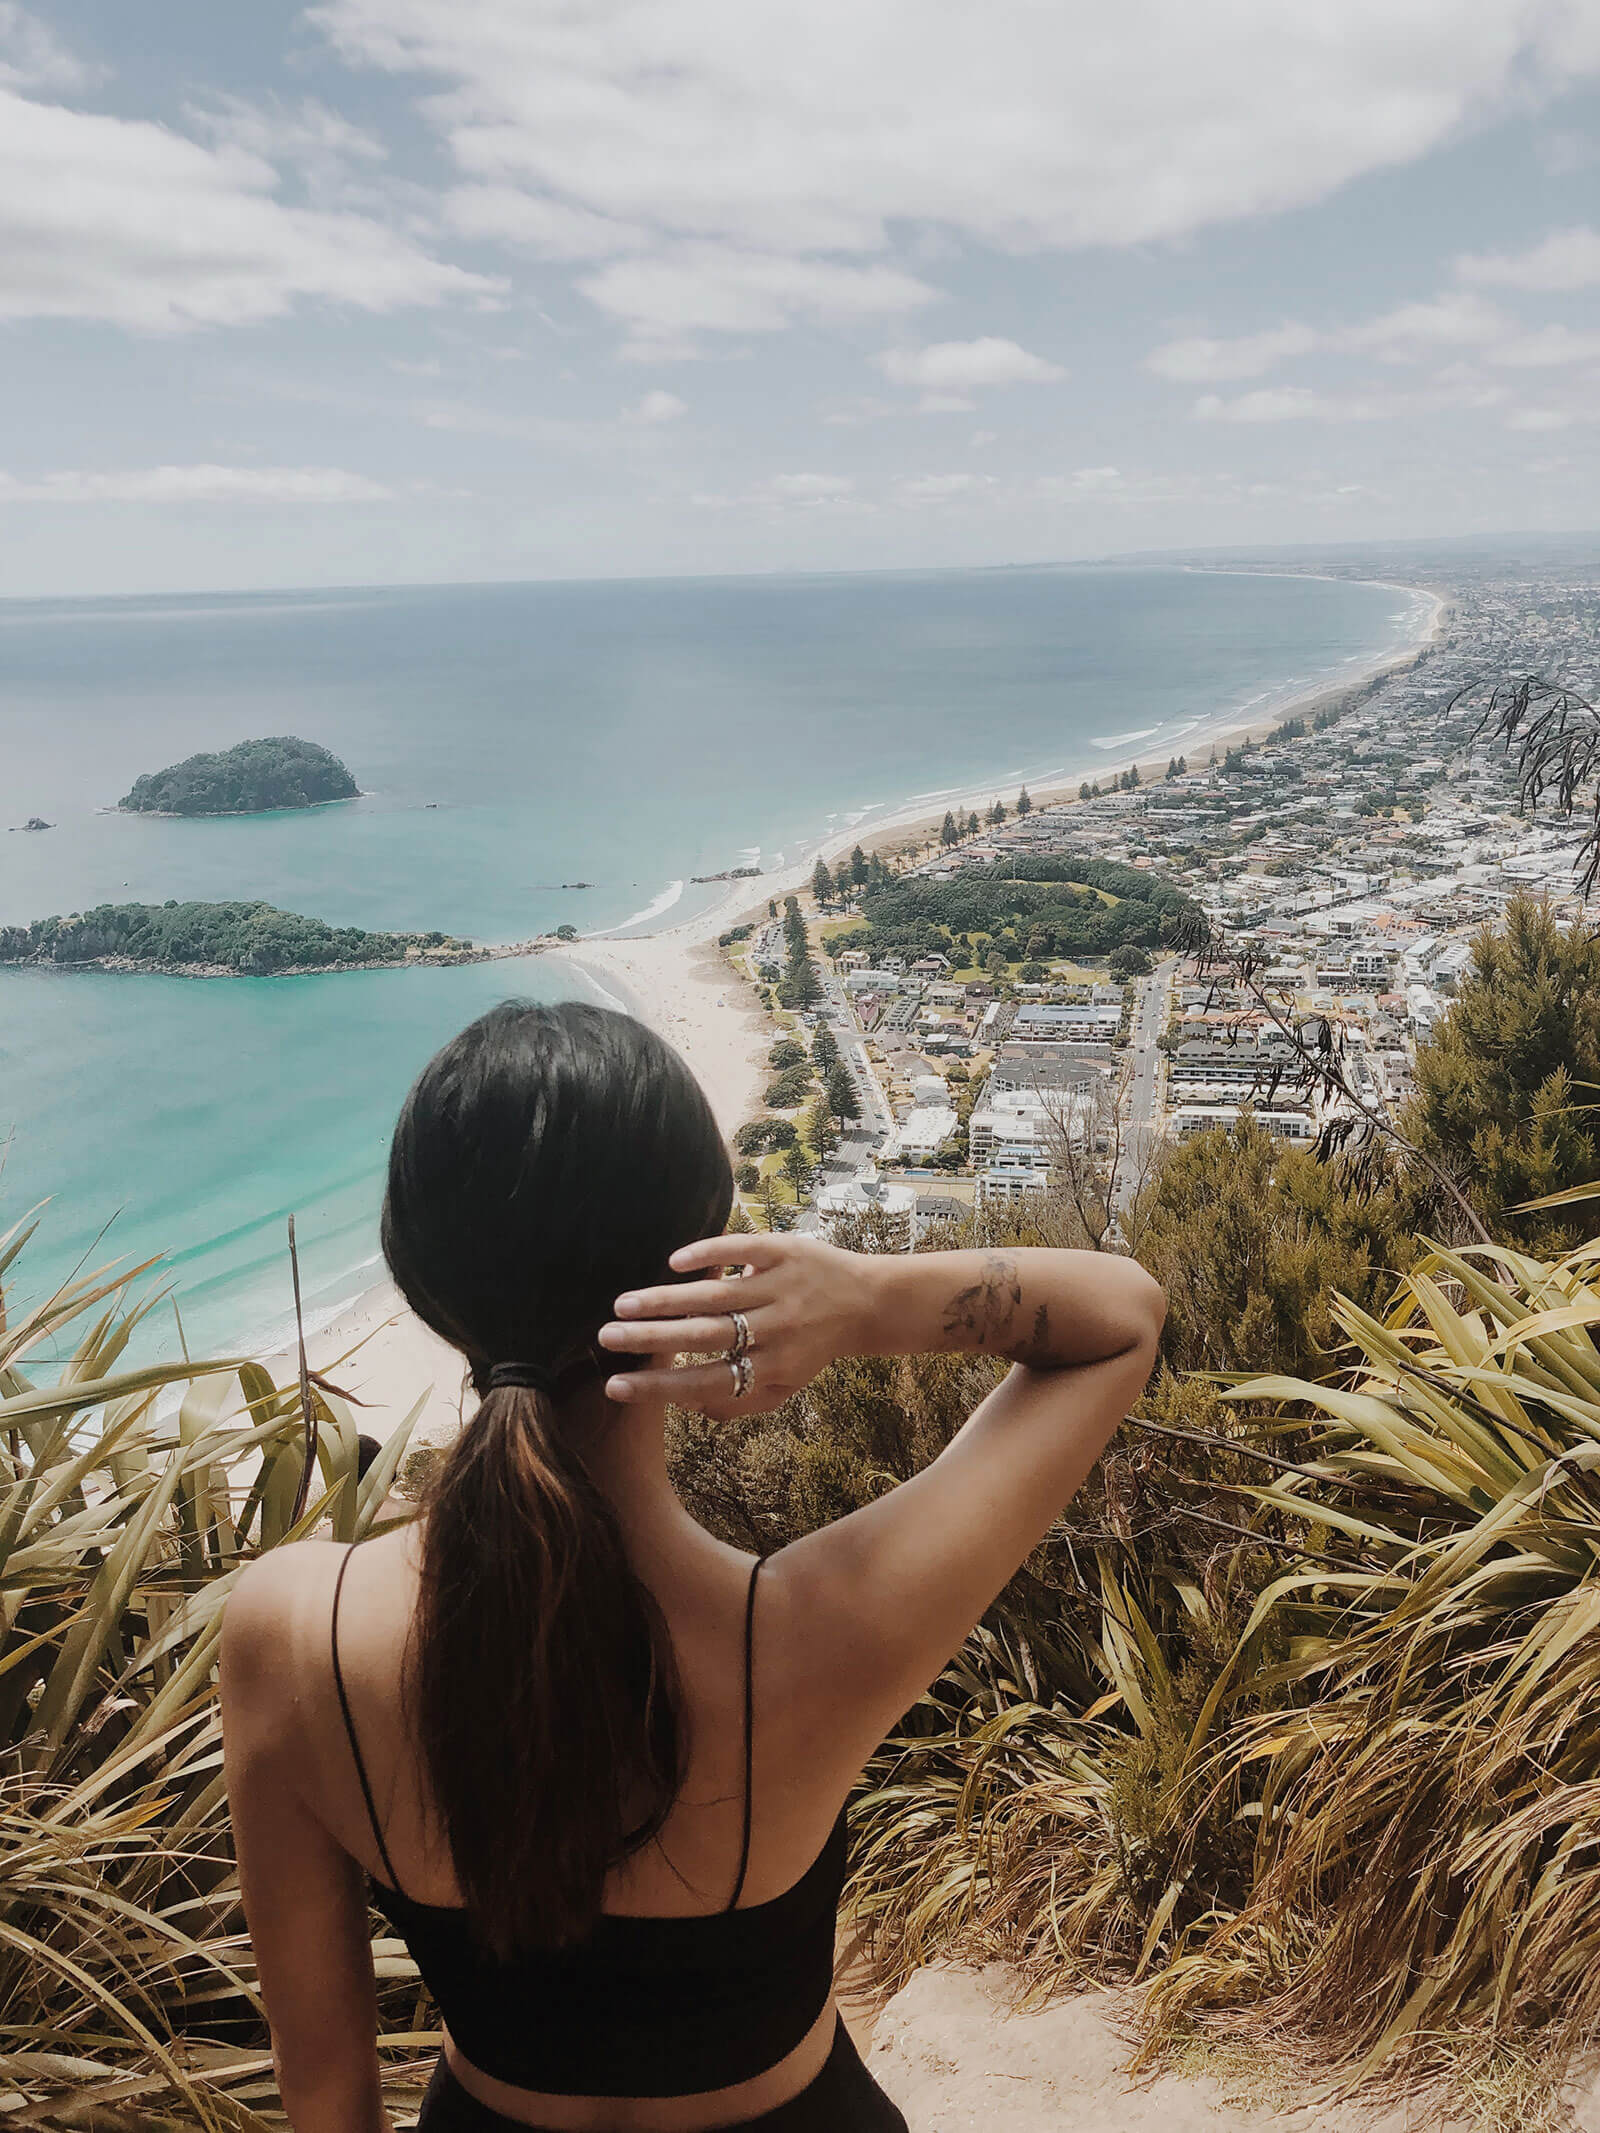 Views from Mount  Maunganui